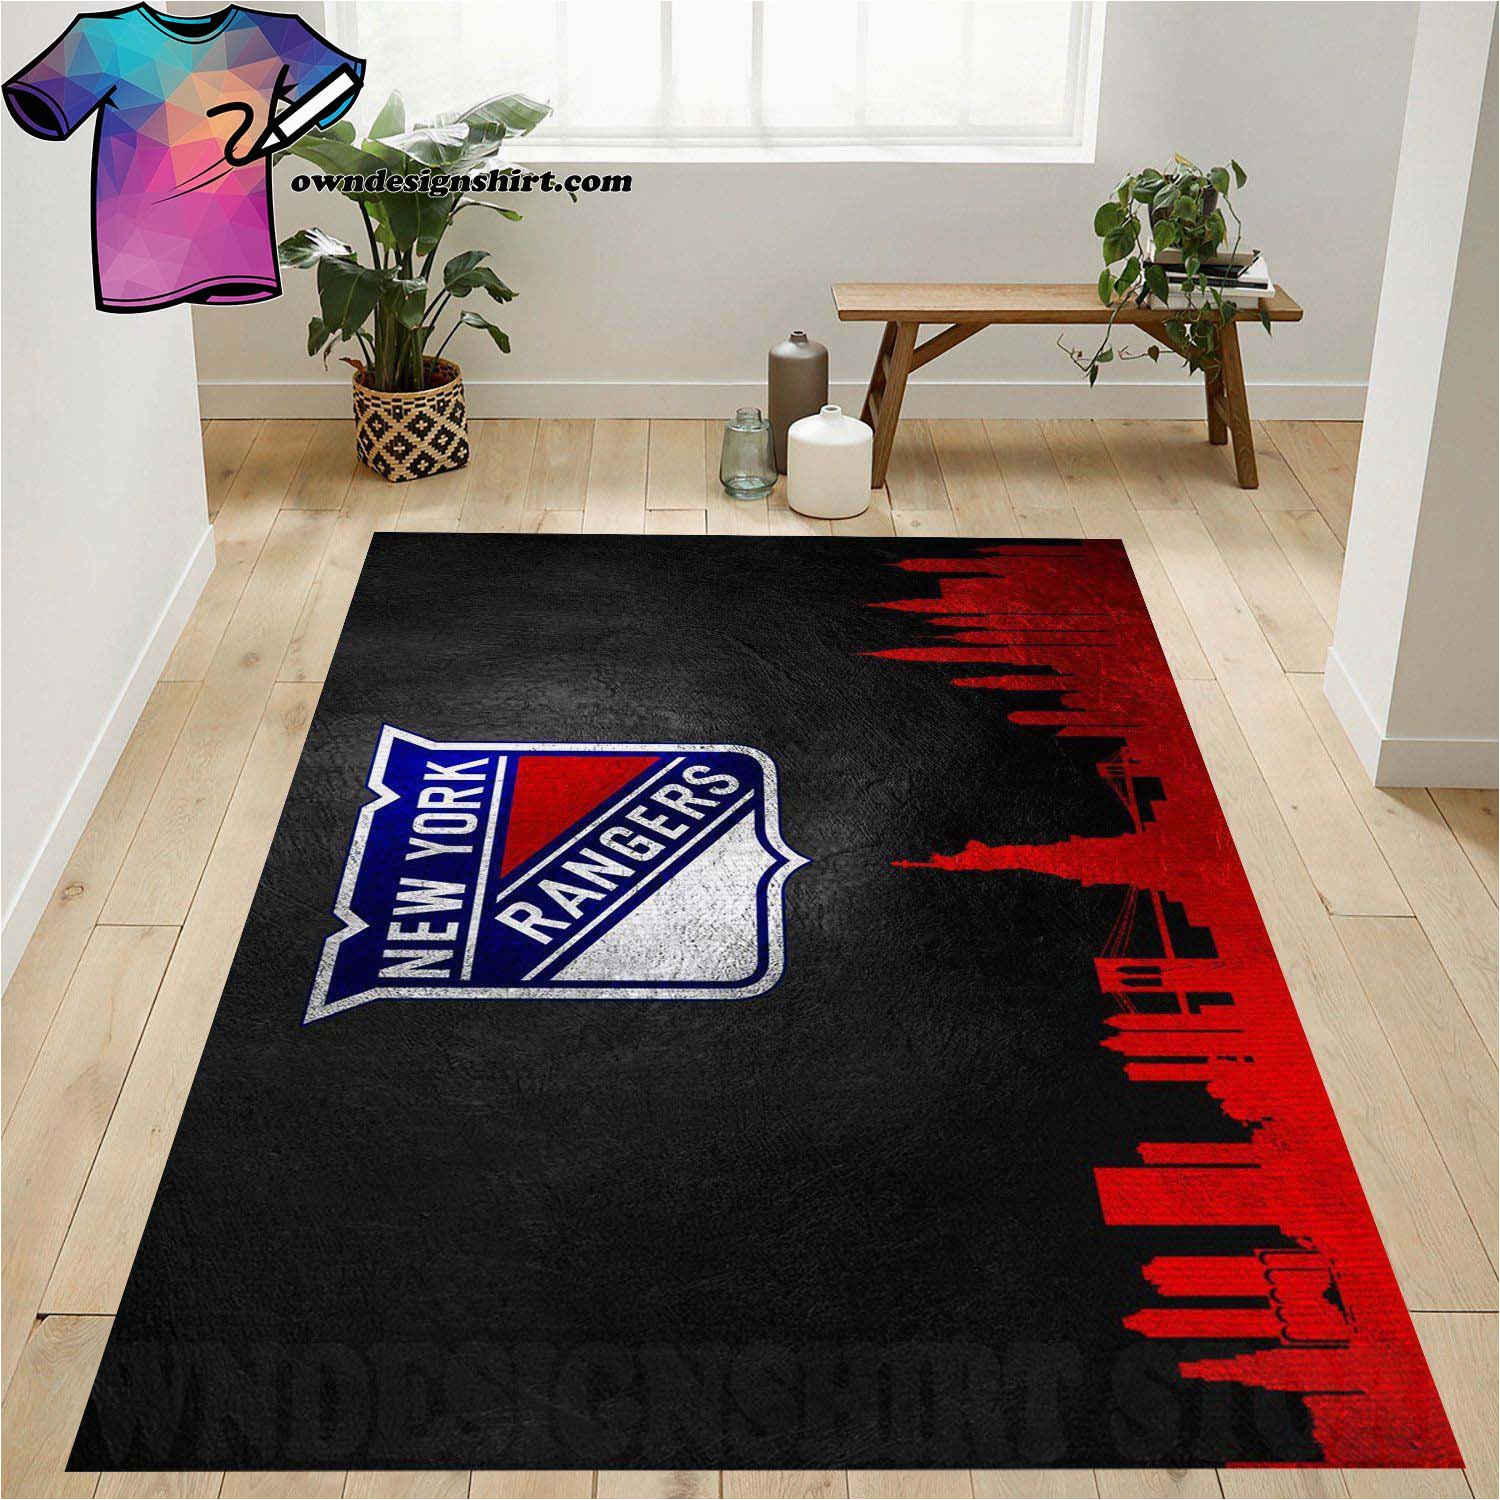 New York Rangers area Rug the Best Selling] Nhl New York Rangers Living Room Home Decor area Rug